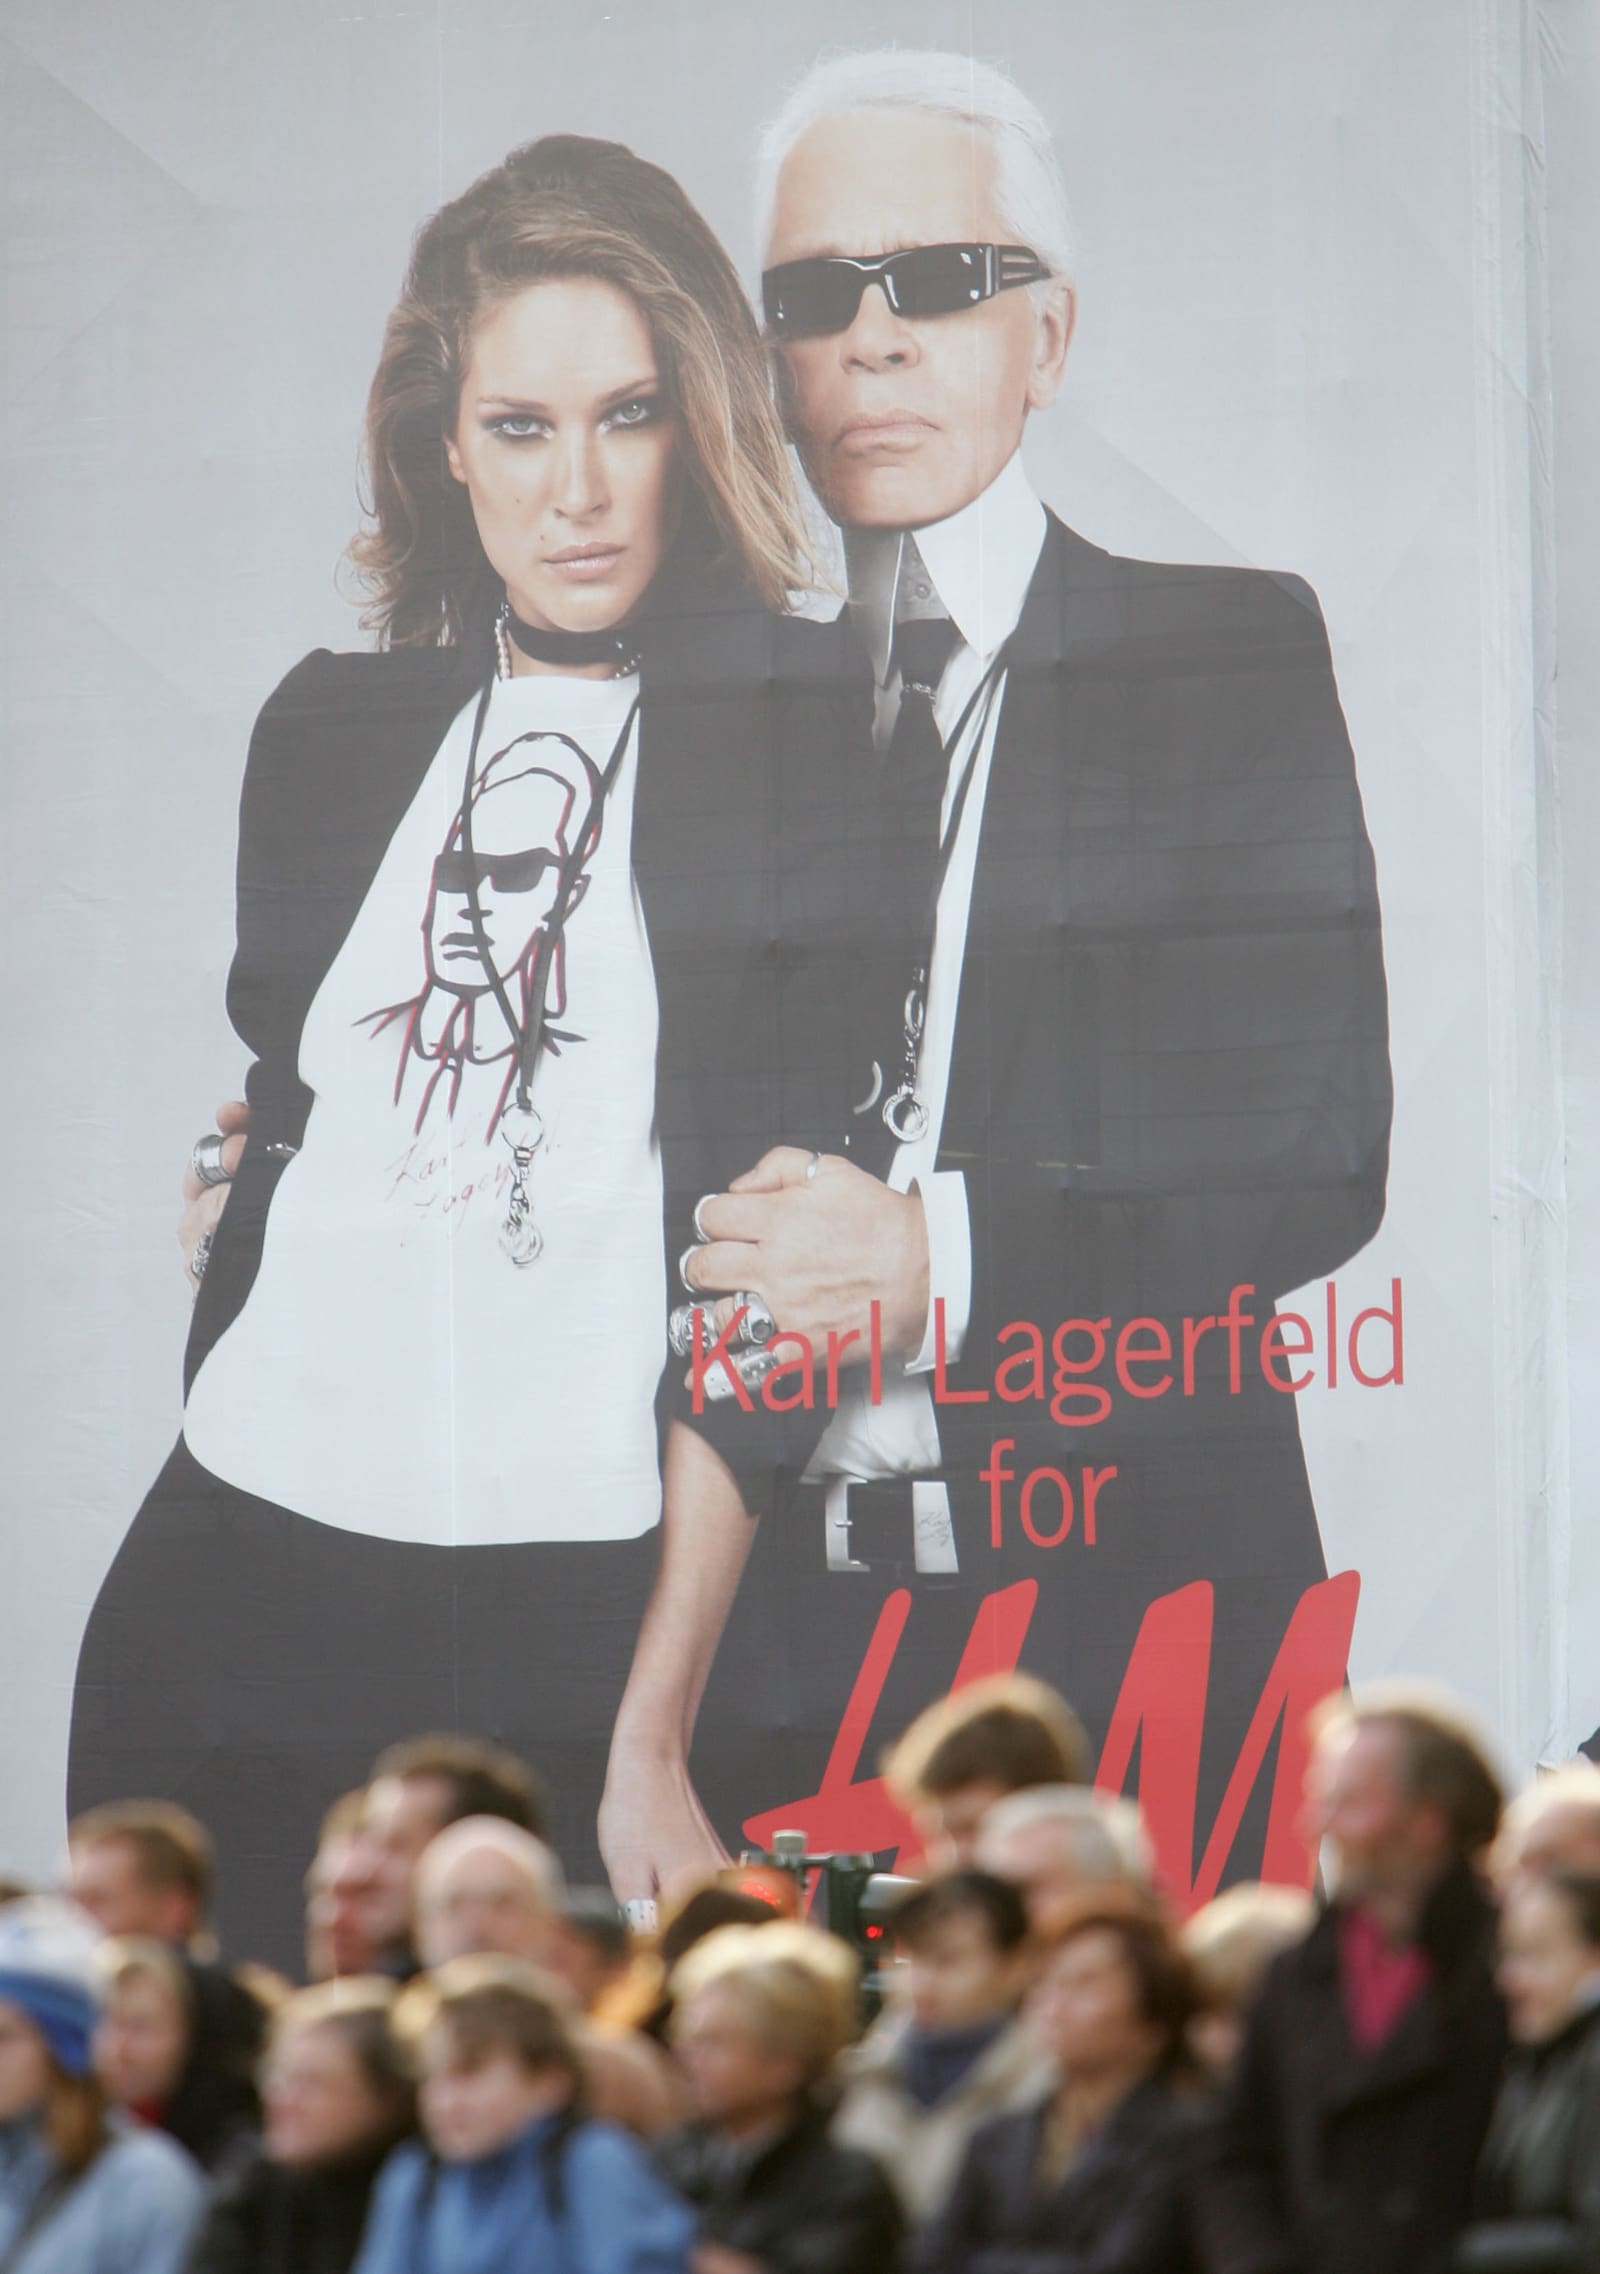 2004 – Lagerfeld joins forces with H&M